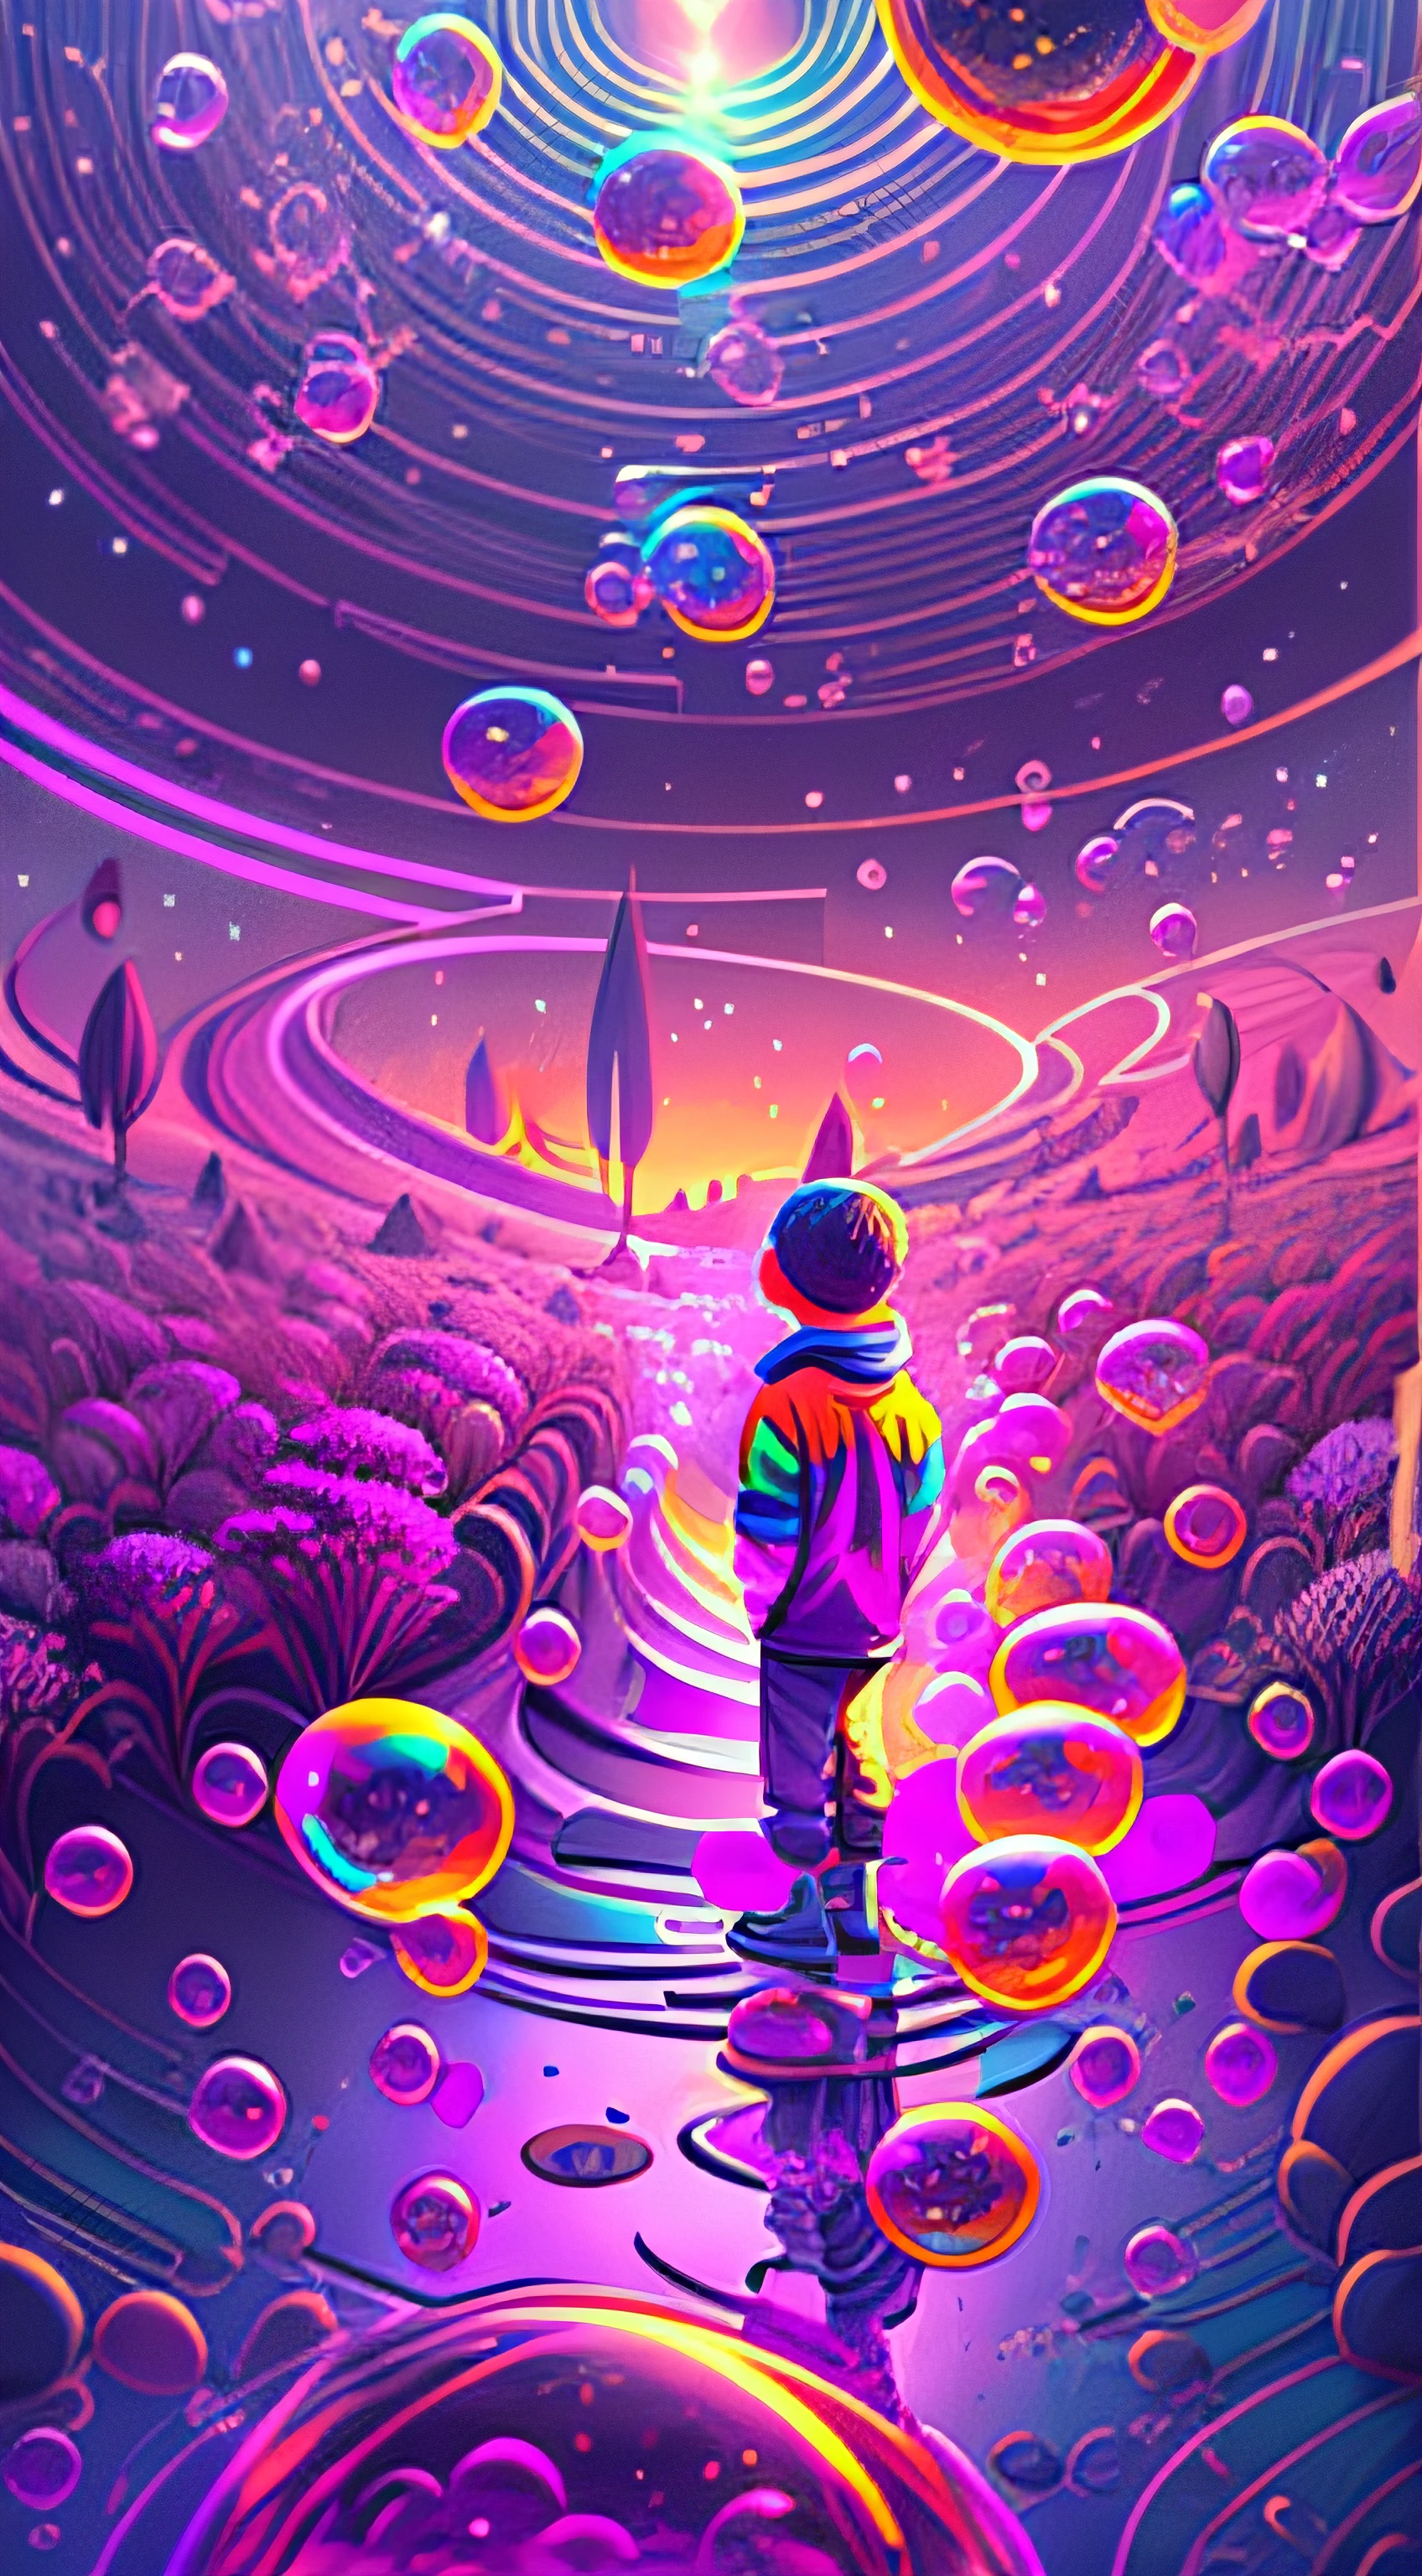 anime scene of a boy standing on a Mysterious path to a land of bubbles, looking at a space with bubbles, 3 d render beeple, beeple masterpiece, beeple rendering, beeple artwork, artgem and beeple masterpiece, inspired by Beeple, in style of beeple, beeple art, beeple daily art, beeple style